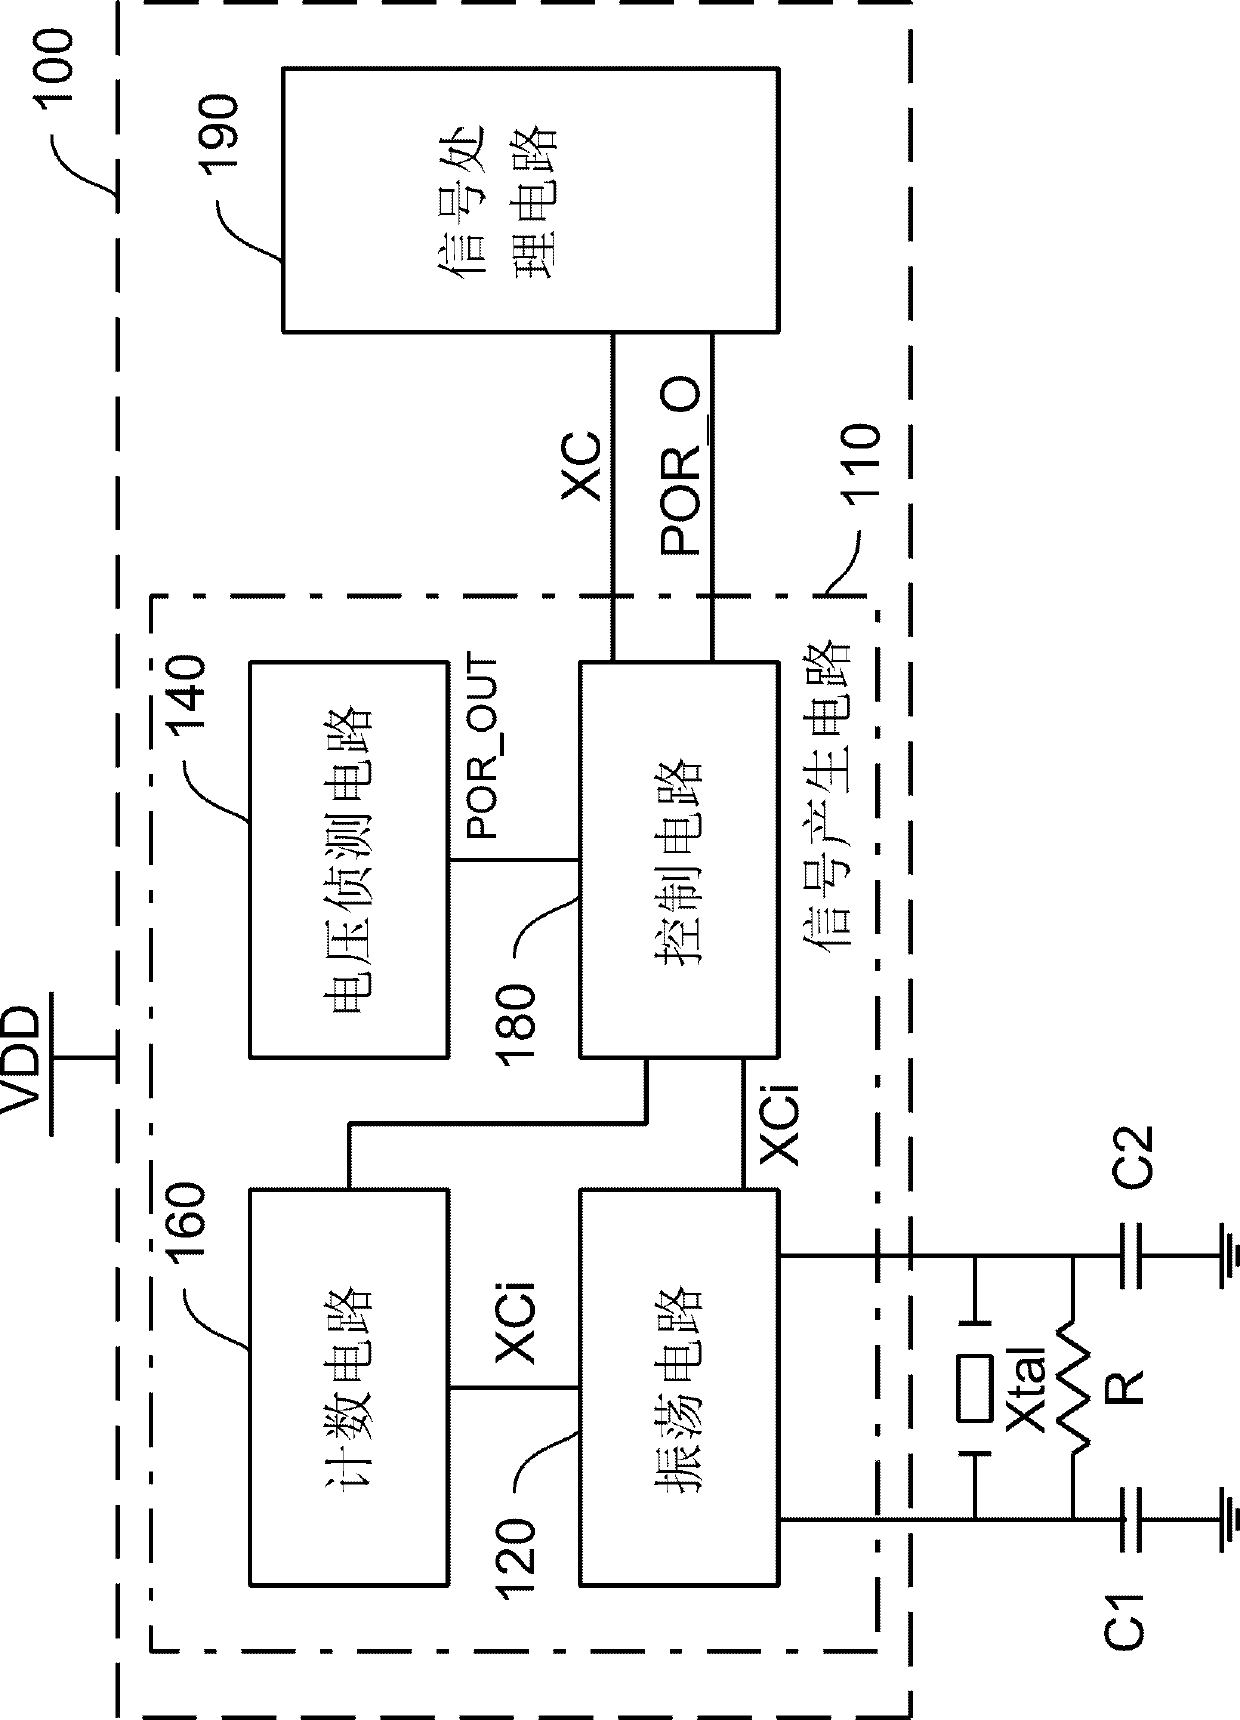 Signal generating circuit for real-time clock device and related method